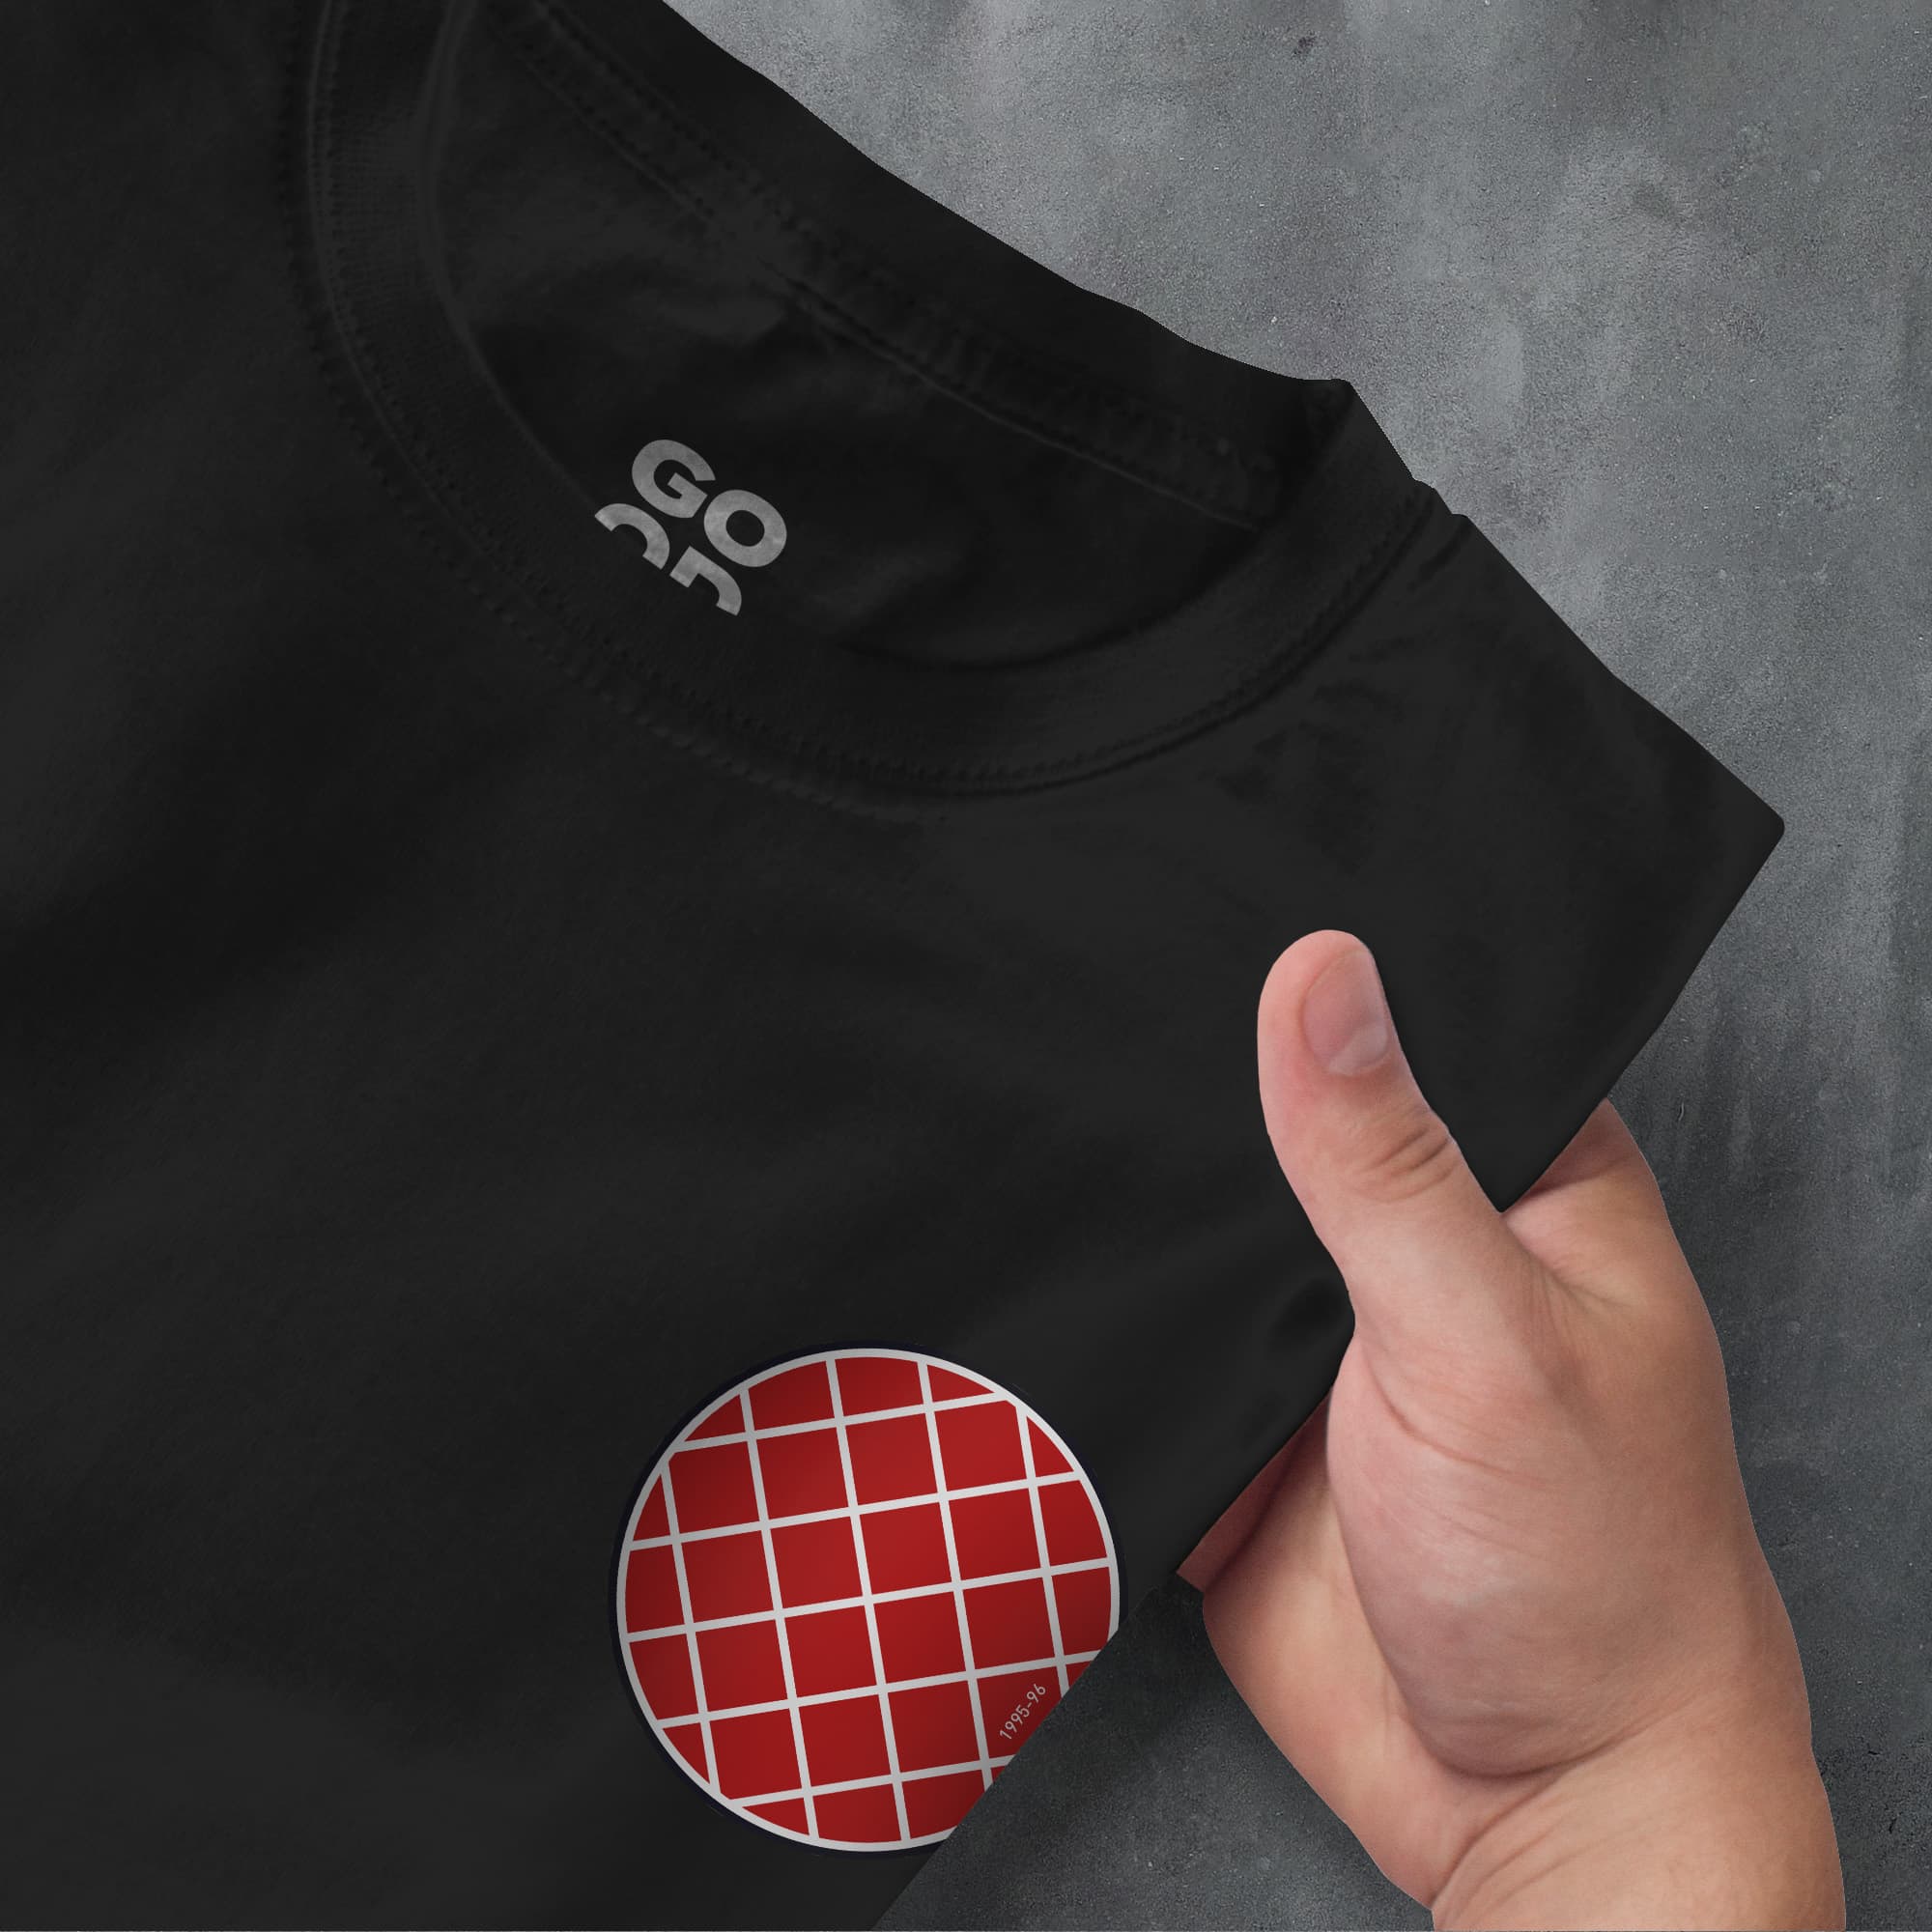 a hand pointing at a red and white checkered circle on a black shirt